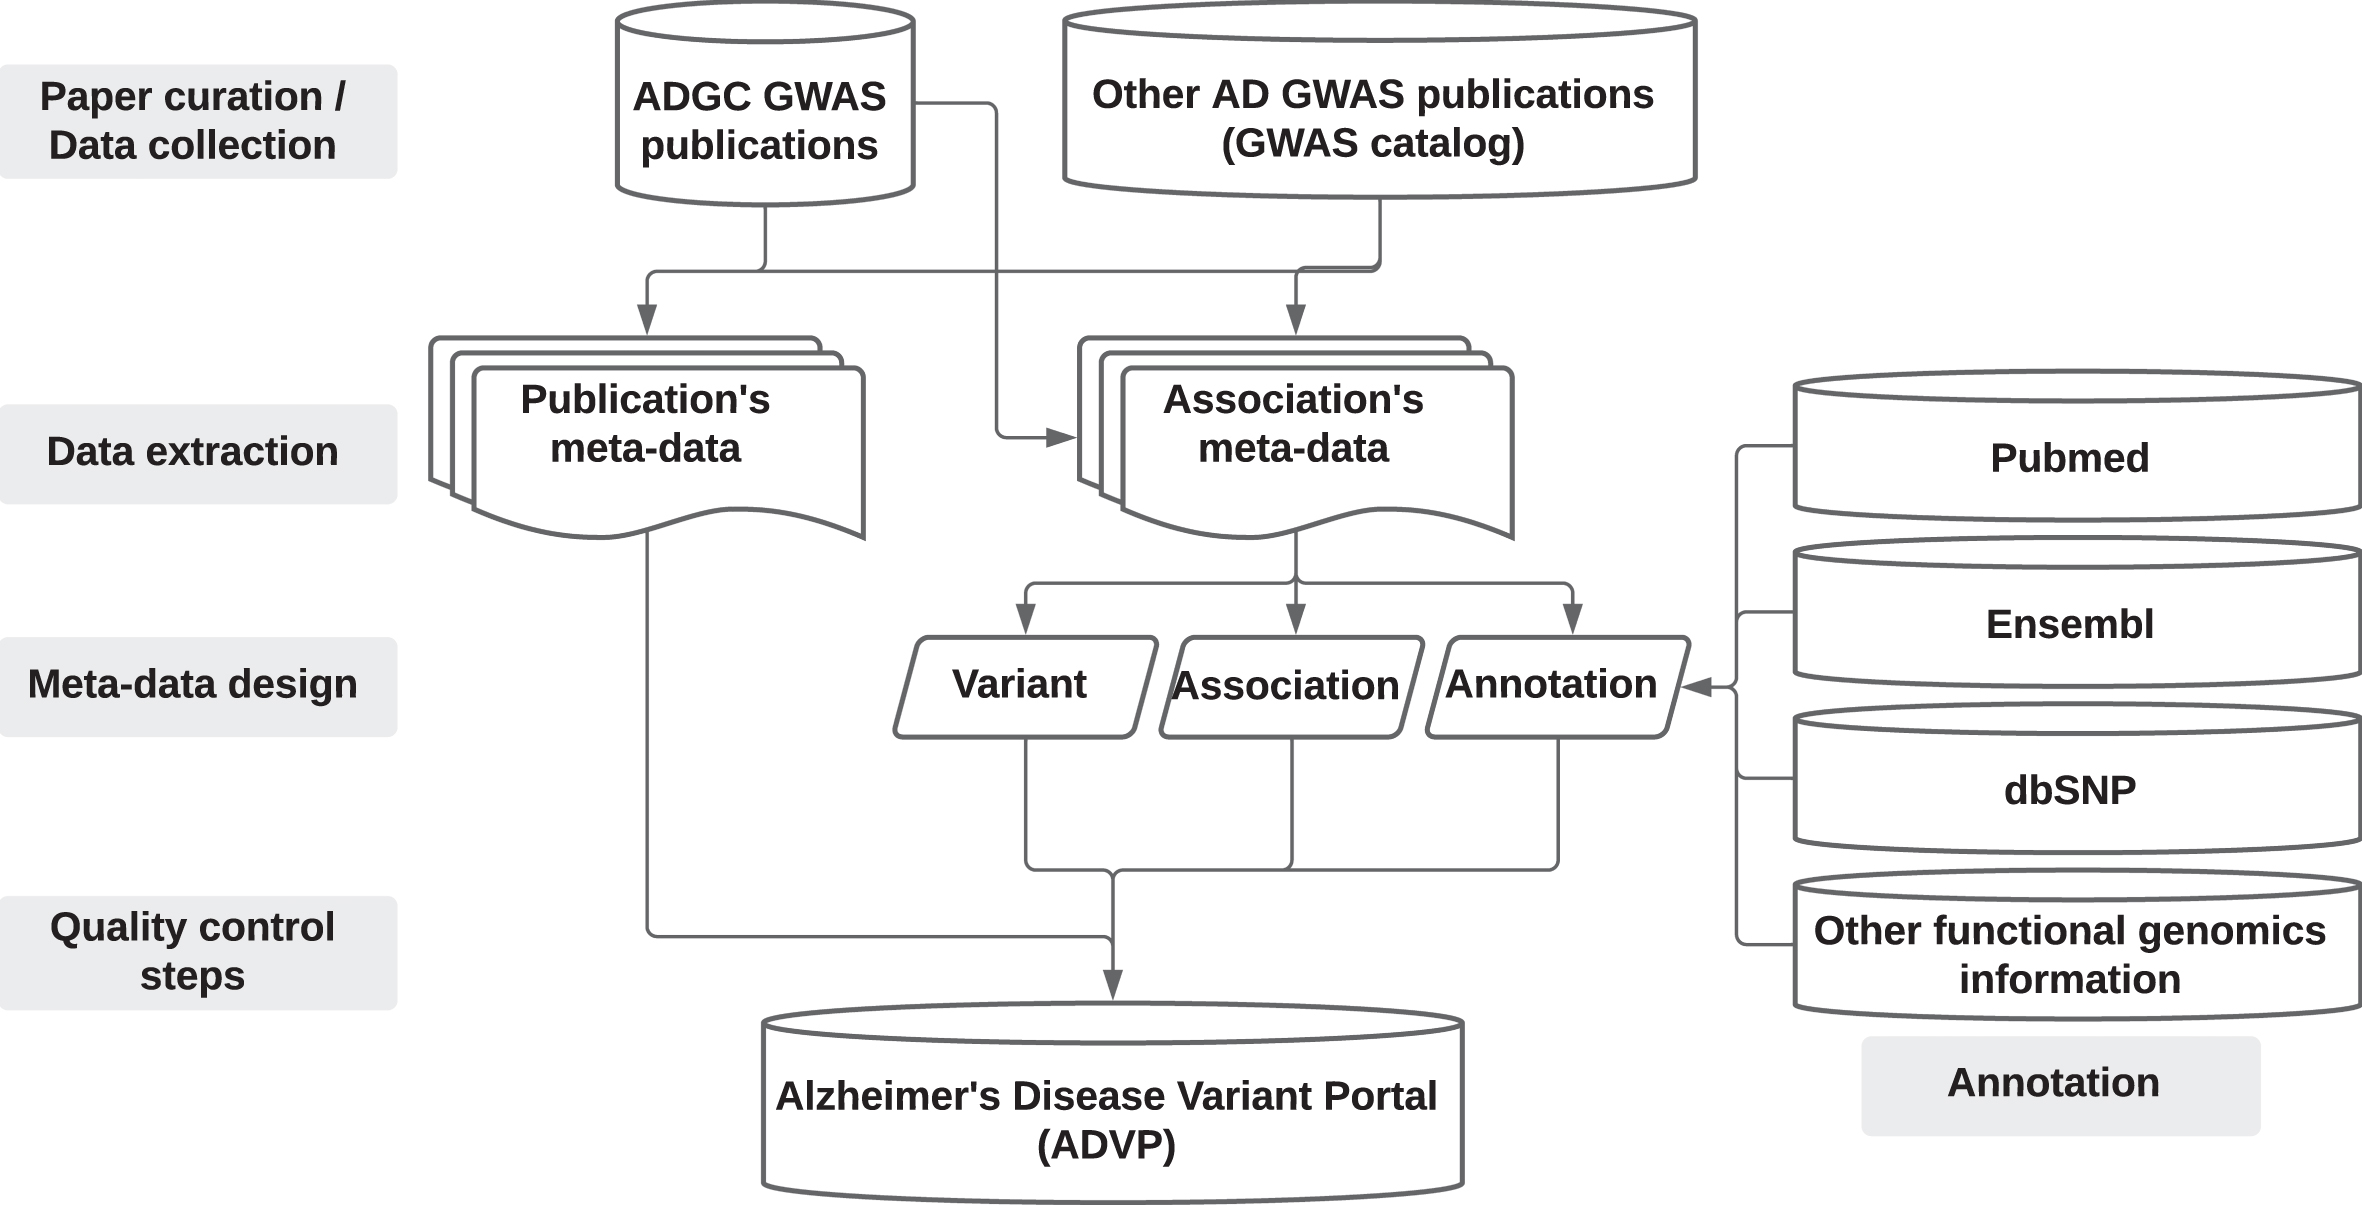 ADVP study design. AD GWAS publications are first collected (Section “Data collection”), genetic variant and association data are then systematically extracted (Section “Data extraction”), harmonized (Section “Meta-data design”), annotated (Section “Annotation”), subjected to quality control steps (Section “Quality control steps”), and stored into ADVP.